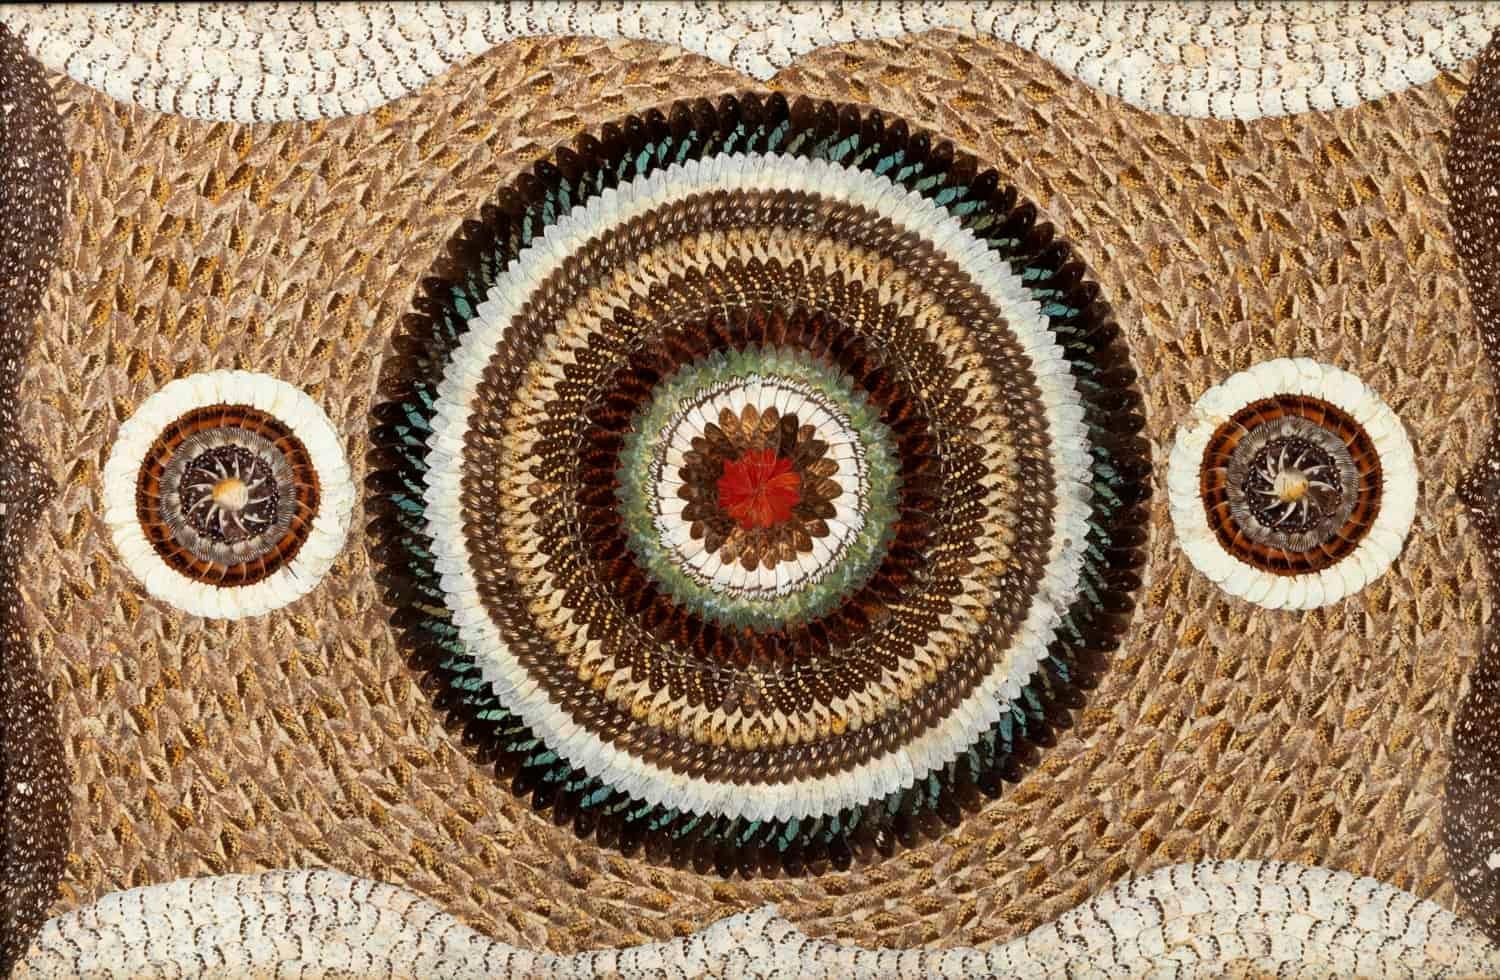 Panel composed by butterflies wings forming three different sizes concentric circles : two smalls in white, beige, brown and orange tones and a large one in blue, white, brown, yellow, beige, green and red tones. They are surrounded by other larger